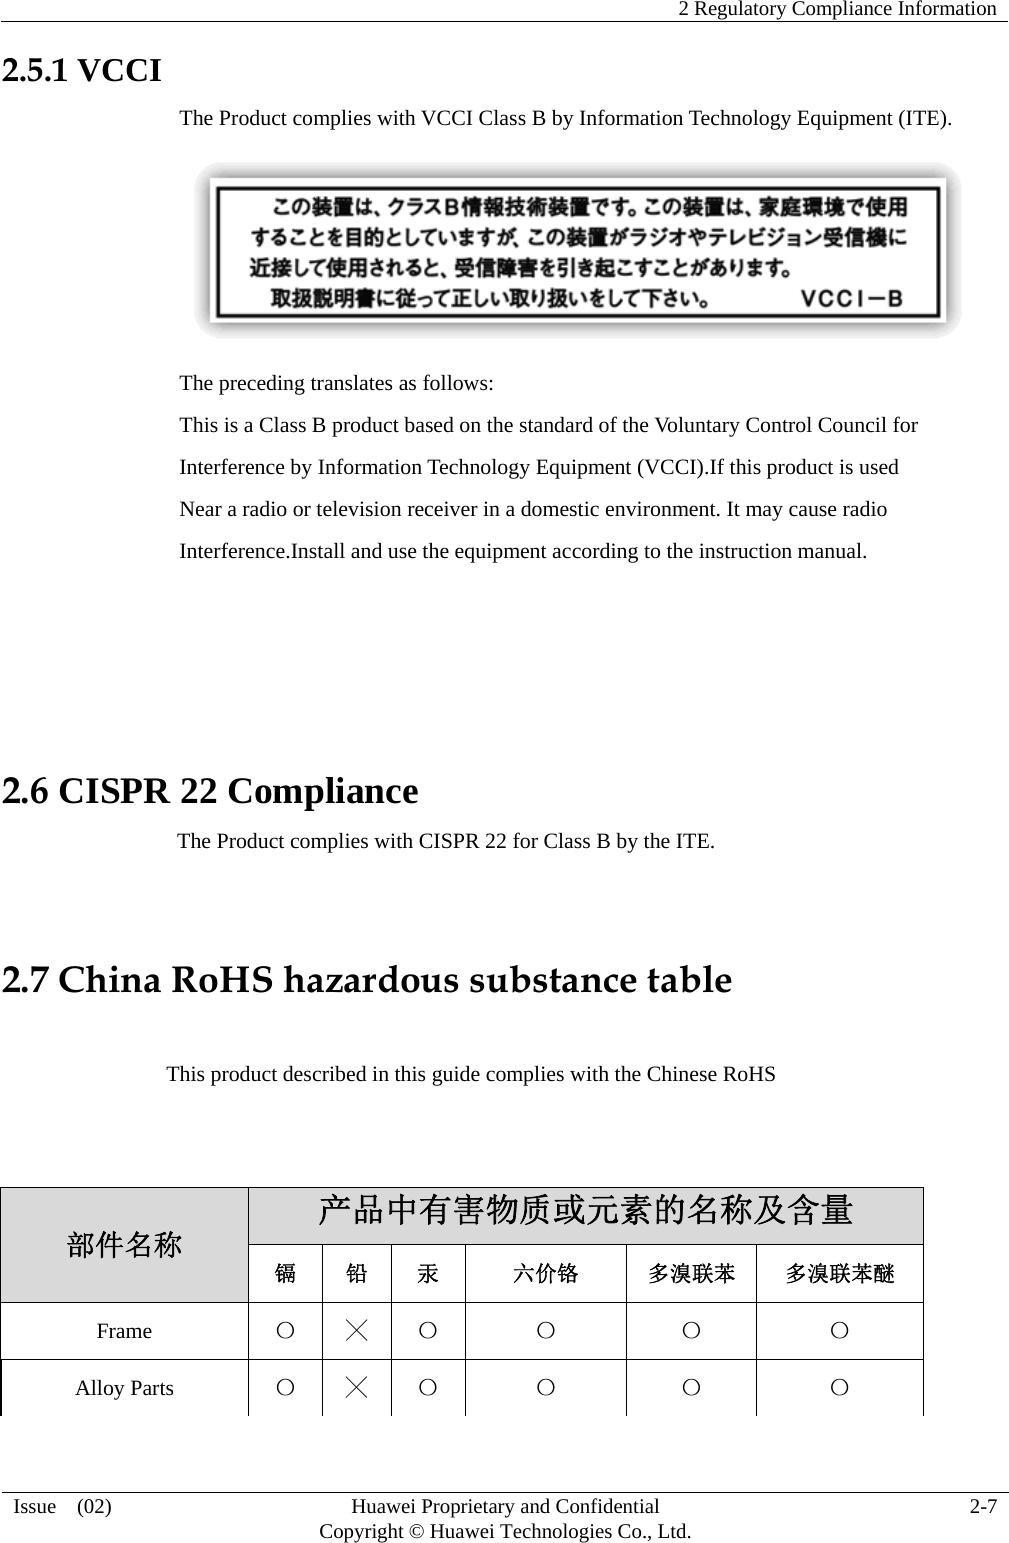    2 Regulatory Compliance Information  Issue  (02)  Huawei Proprietary and Confidential     Copyright © Huawei Technologies Co., Ltd.  2-7  2.5.1 VCCI The Product complies with VCCI Class B by Information Technology Equipment (ITE).  The preceding translates as follows: This is a Class B product based on the standard of the Voluntary Control Council for Interference by Information Technology Equipment (VCCI).If this product is used Near a radio or television receiver in a domestic environment. It may cause radio Interference.Install and use the equipment according to the instruction manual.    2.6 CISPR 22 Compliance                                 The Product complies with CISPR 22 for Class B by the ITE.  2.7 China RoHS hazardous substance table                 This product described in this guide complies with the Chinese RoHS   部件名称 产品中有害物质或元素的名称及含量 镉 铅 汞 六价铬 多溴联苯 多溴联苯醚 Frame  〇 ╳ 〇 〇 〇 〇 Alloy Parts  〇 ╳ 〇 〇 〇 〇 